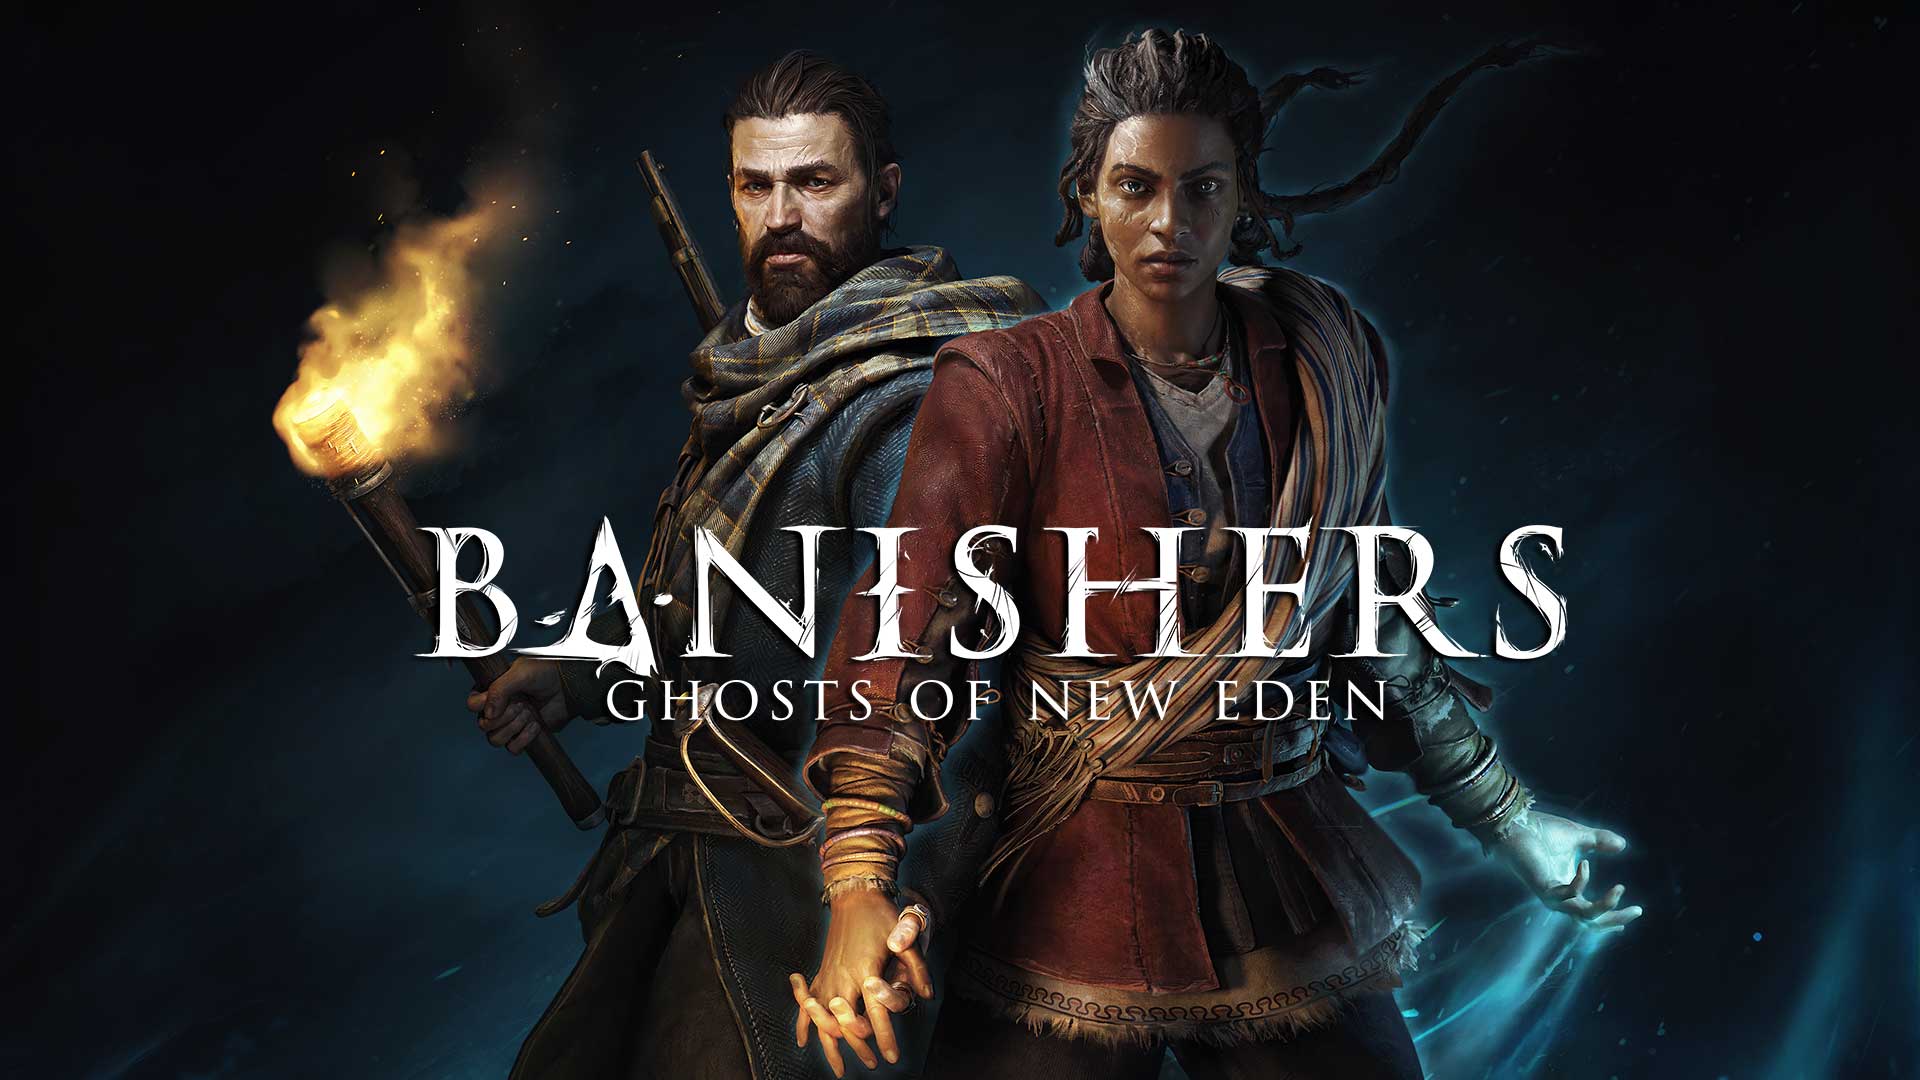 Banishers: Ghosts of New Eden – Behind the Scenes with the Voice Actors of Red and Antea